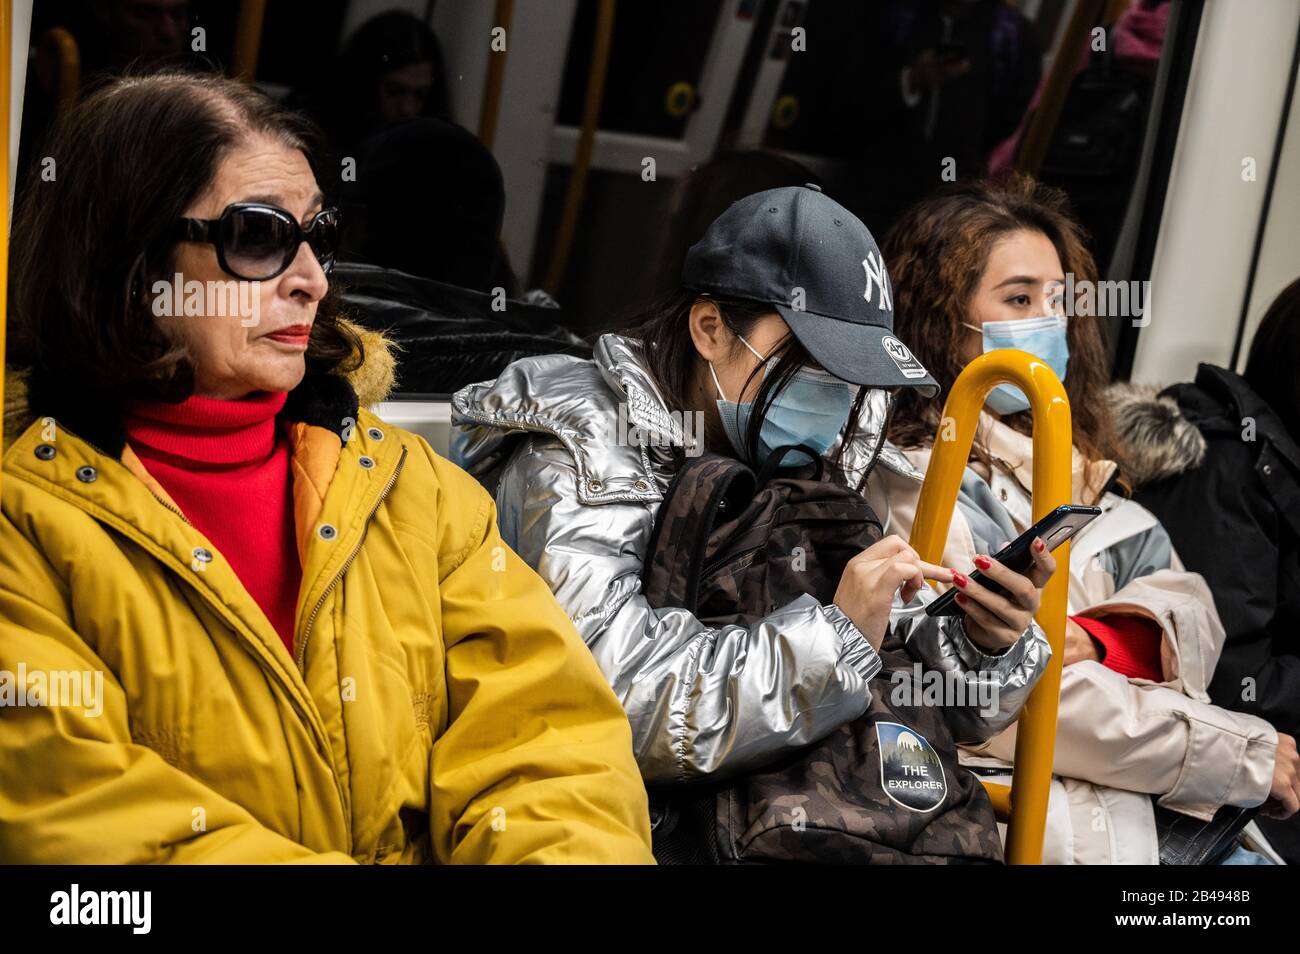 Madrid, Spain. 06th Mar, 2020. Madrid, Spain. March 6, 2020. A couple of asian tourists wearing masks probably to prevent infection of the coronavirus (Covid-19) seen in the subway. Spain has reported to date 5 deaths and 345 infected by the coronavirus. Credit: Marcos del Mazo/Alamy Live News Stock Photo